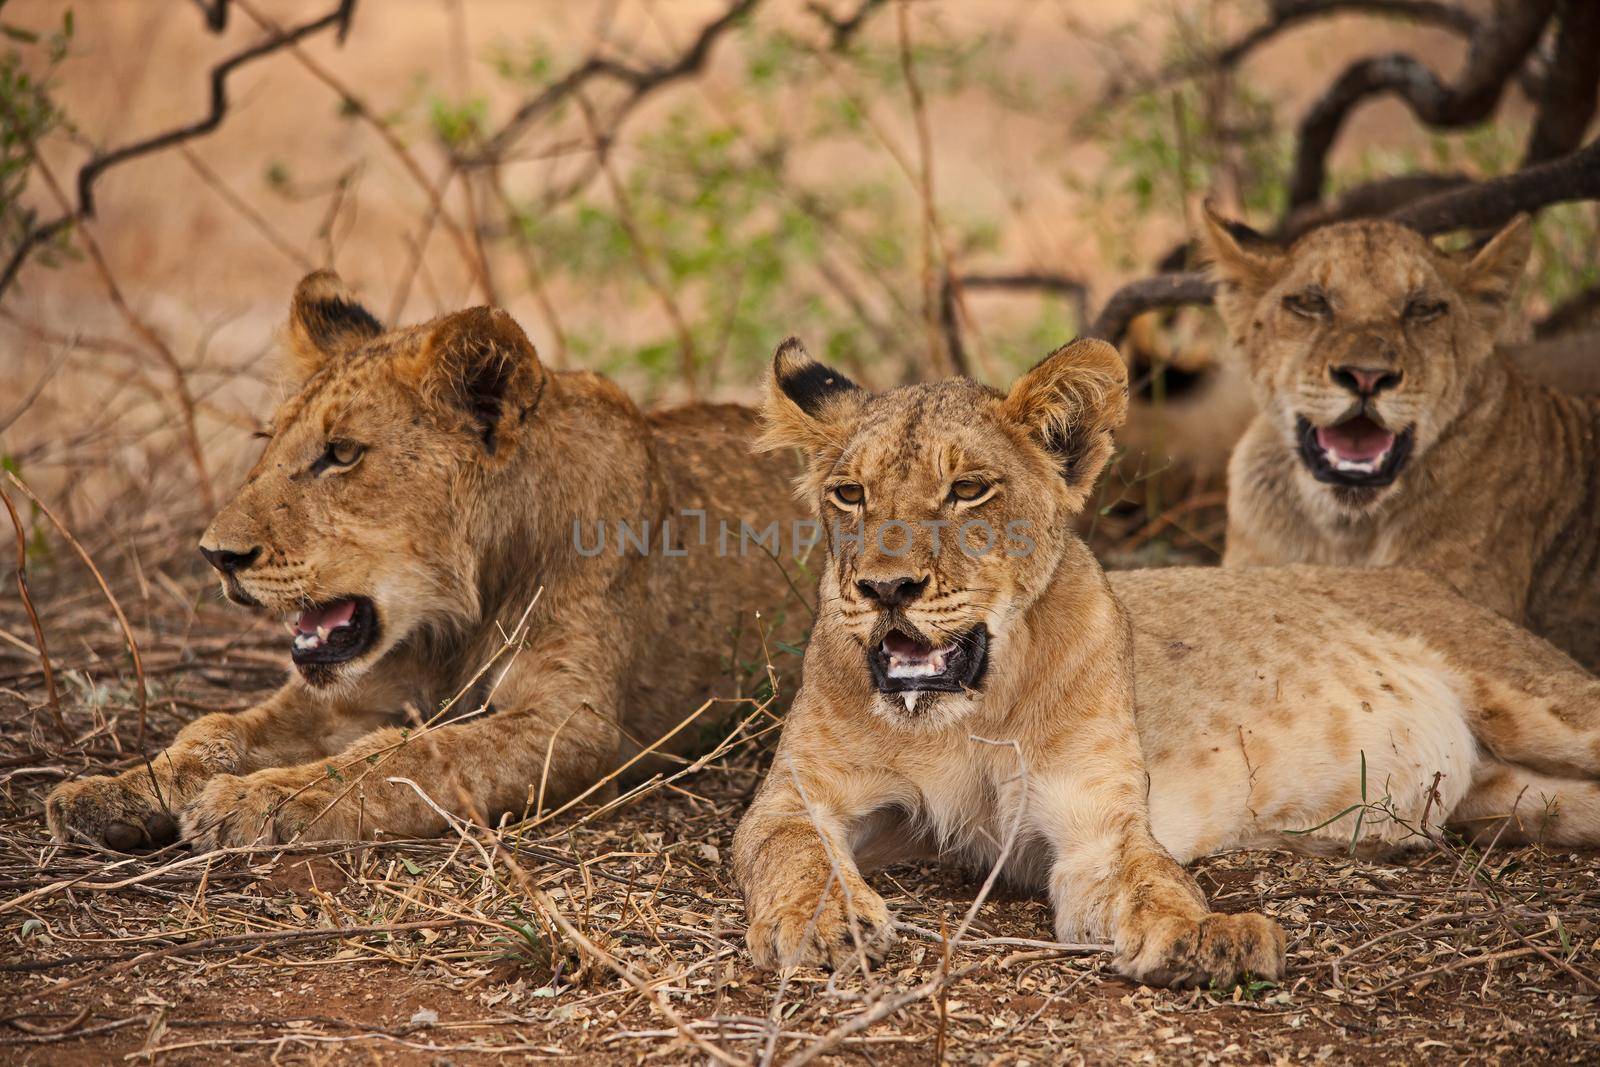 Sub-adult lions resting 14997 by kobus_peche